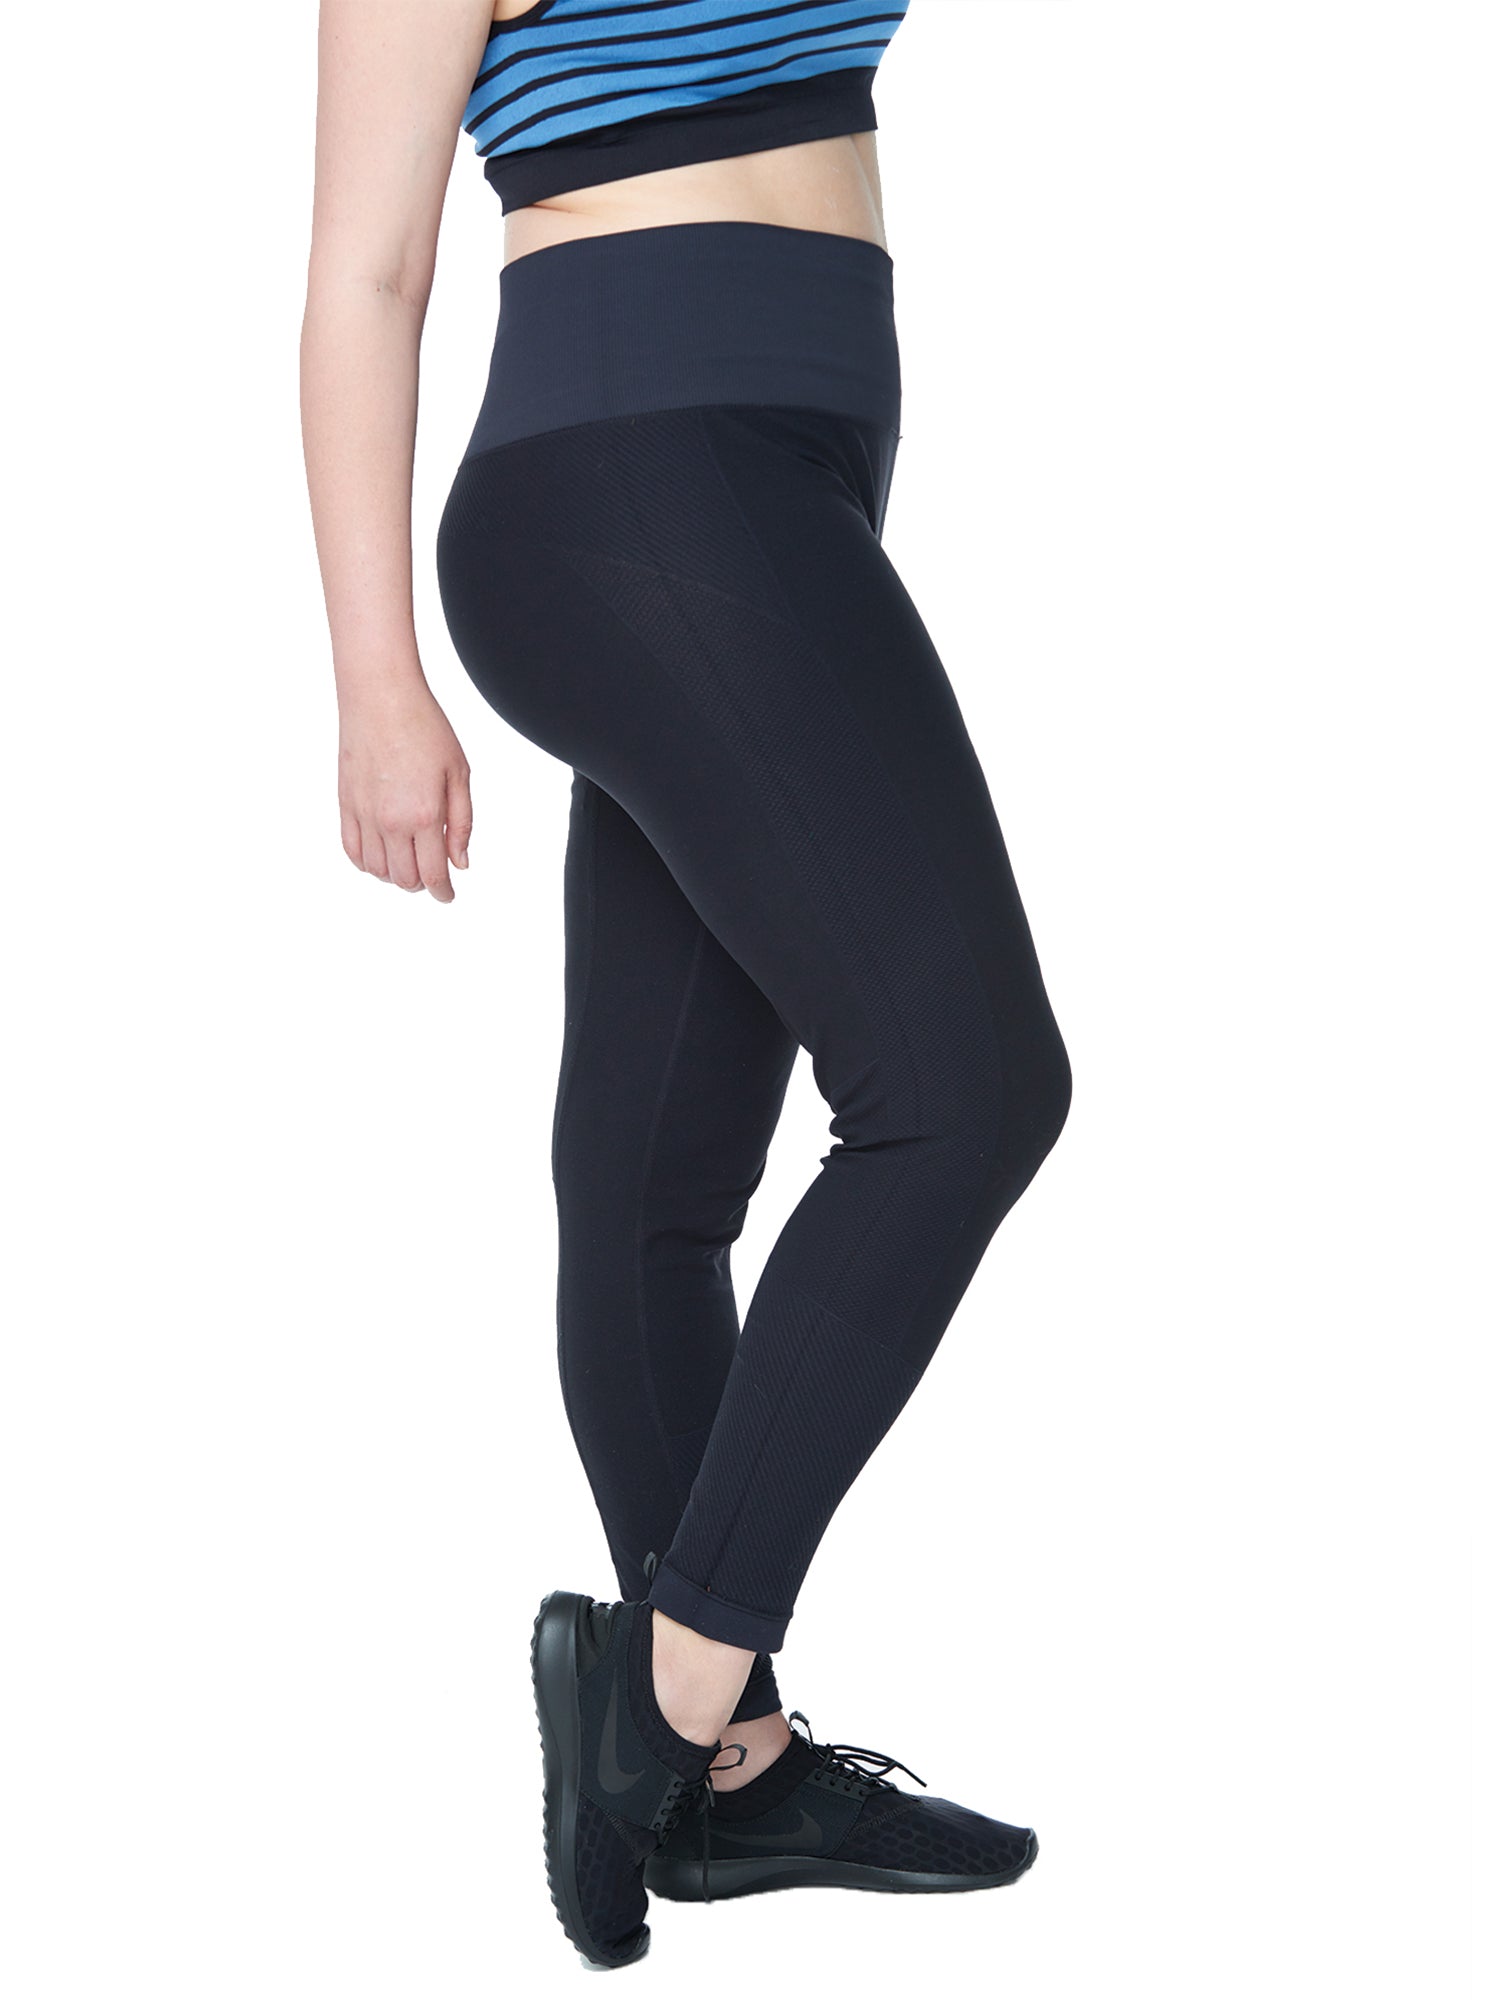 CTHH Fleece Lined Leggings for Women Thermal Tummy Control High